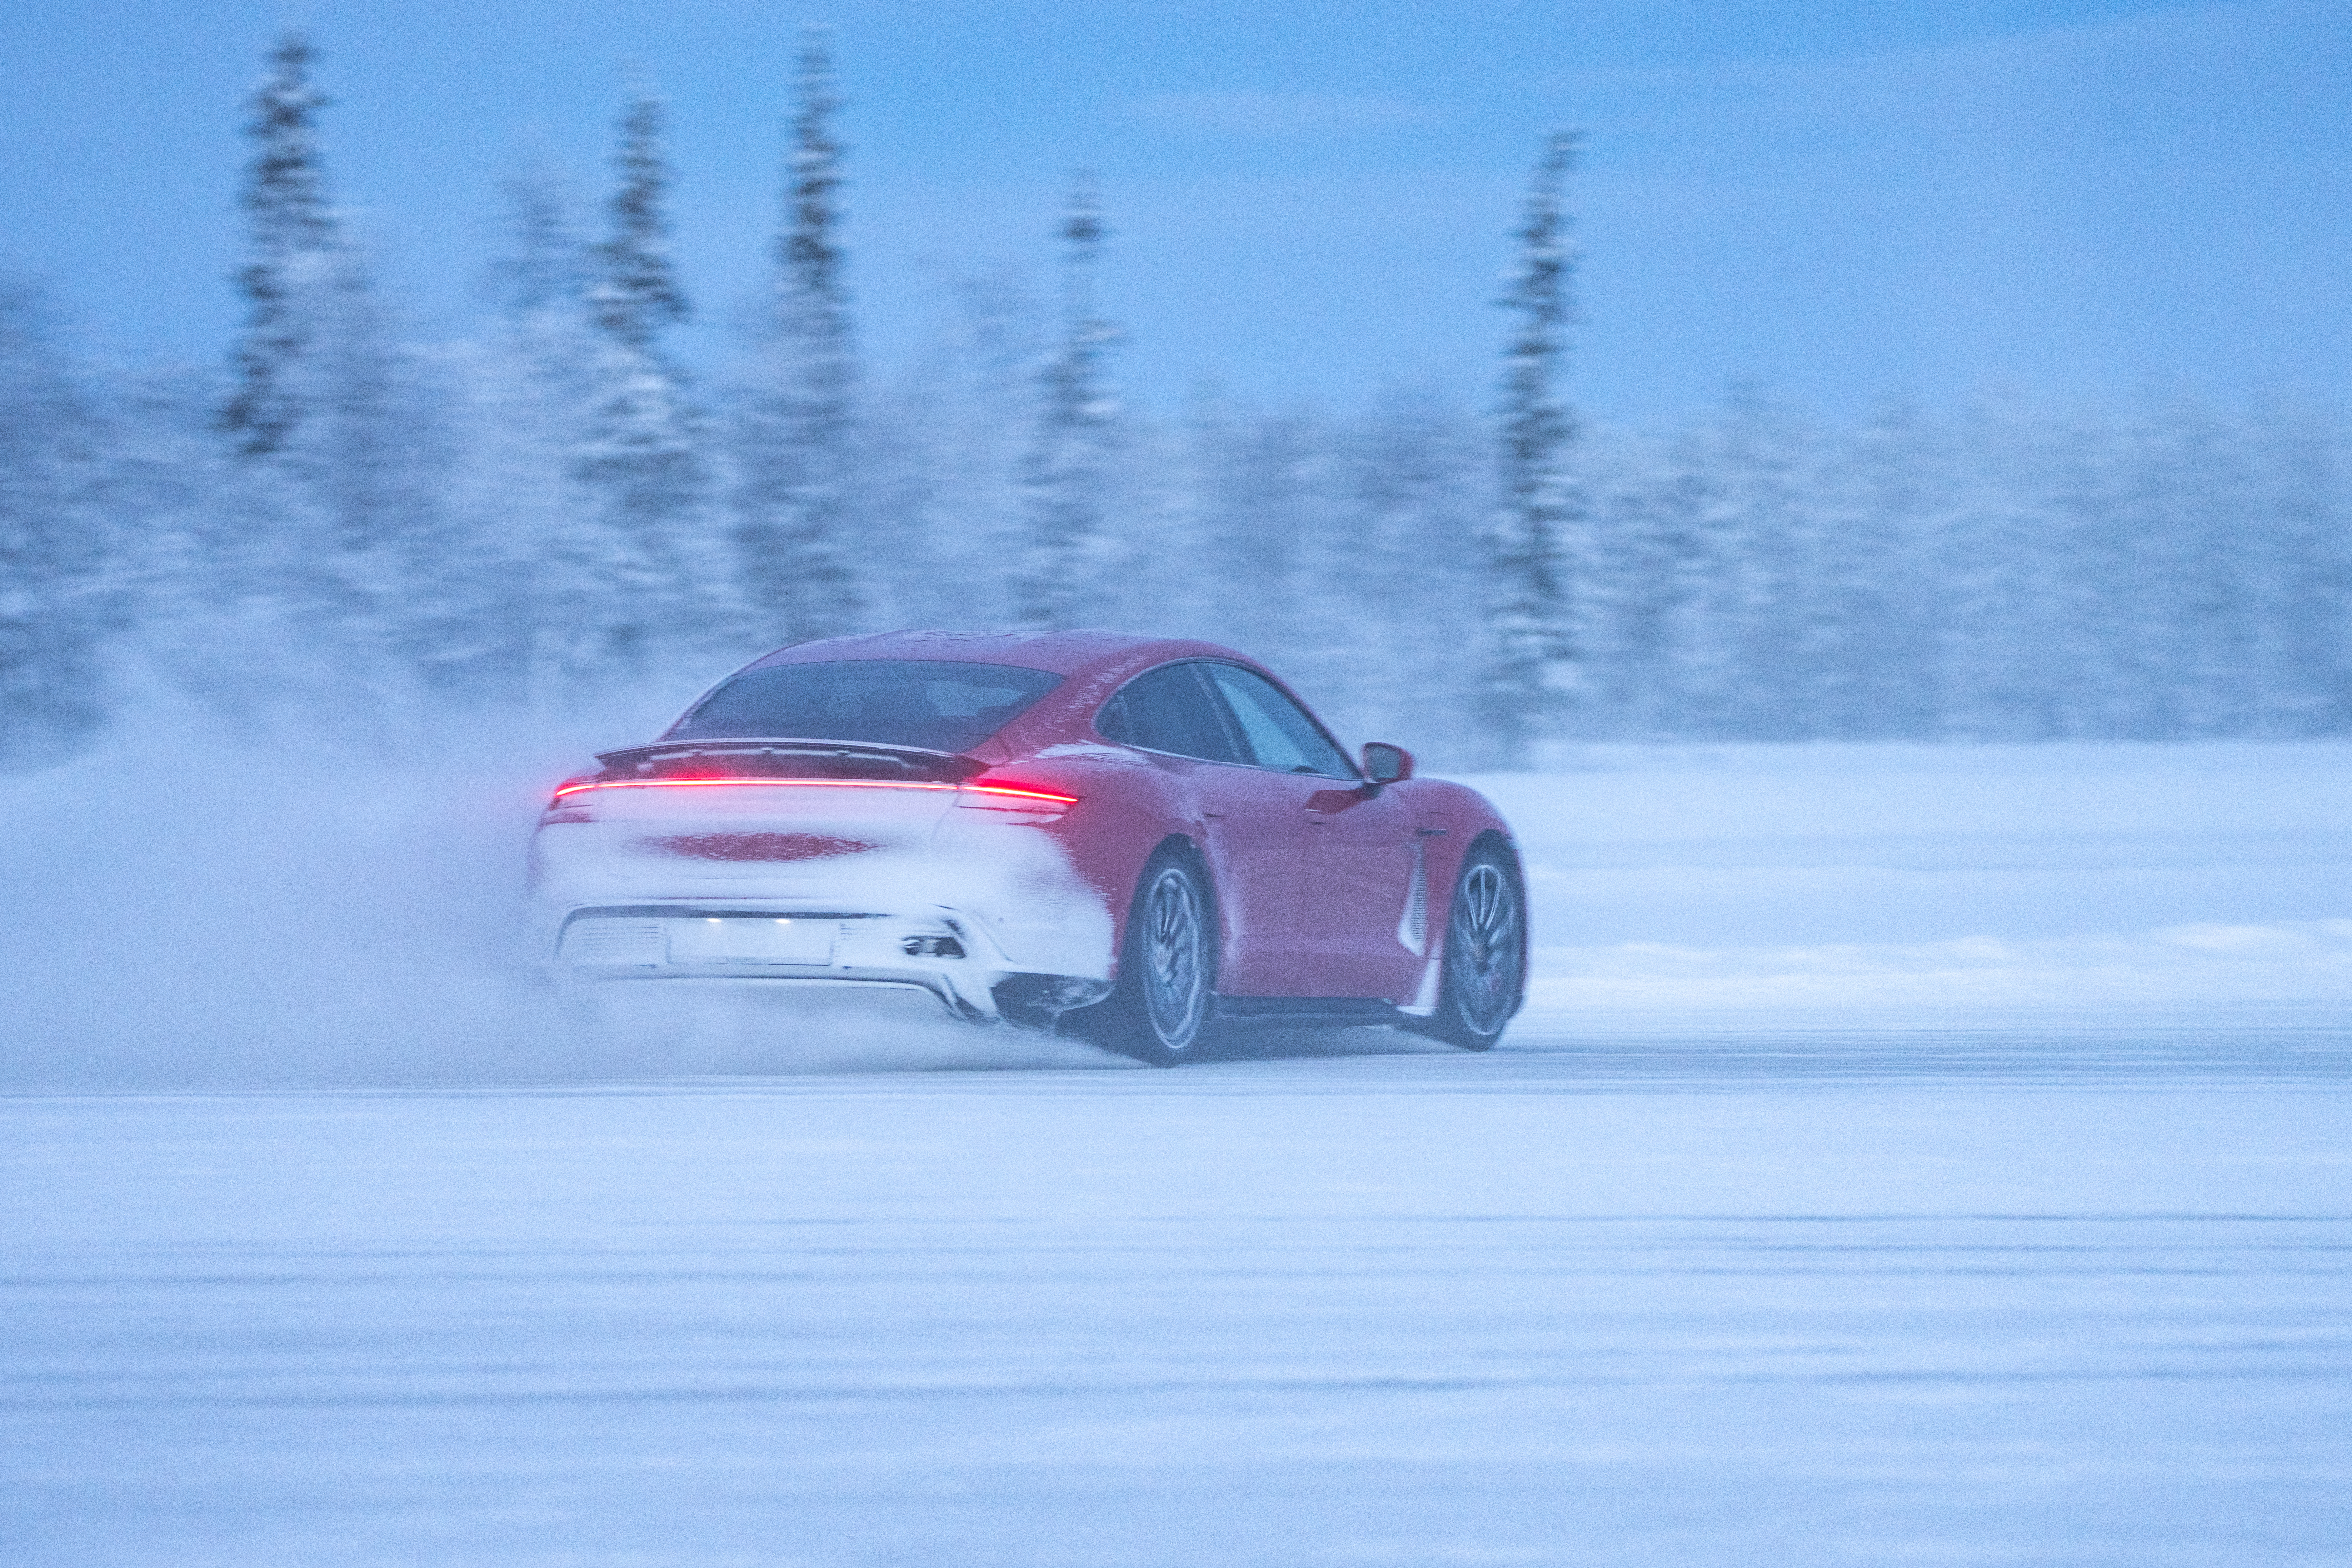 Snow kicked up by high-speed Porsche Taycan on icy field